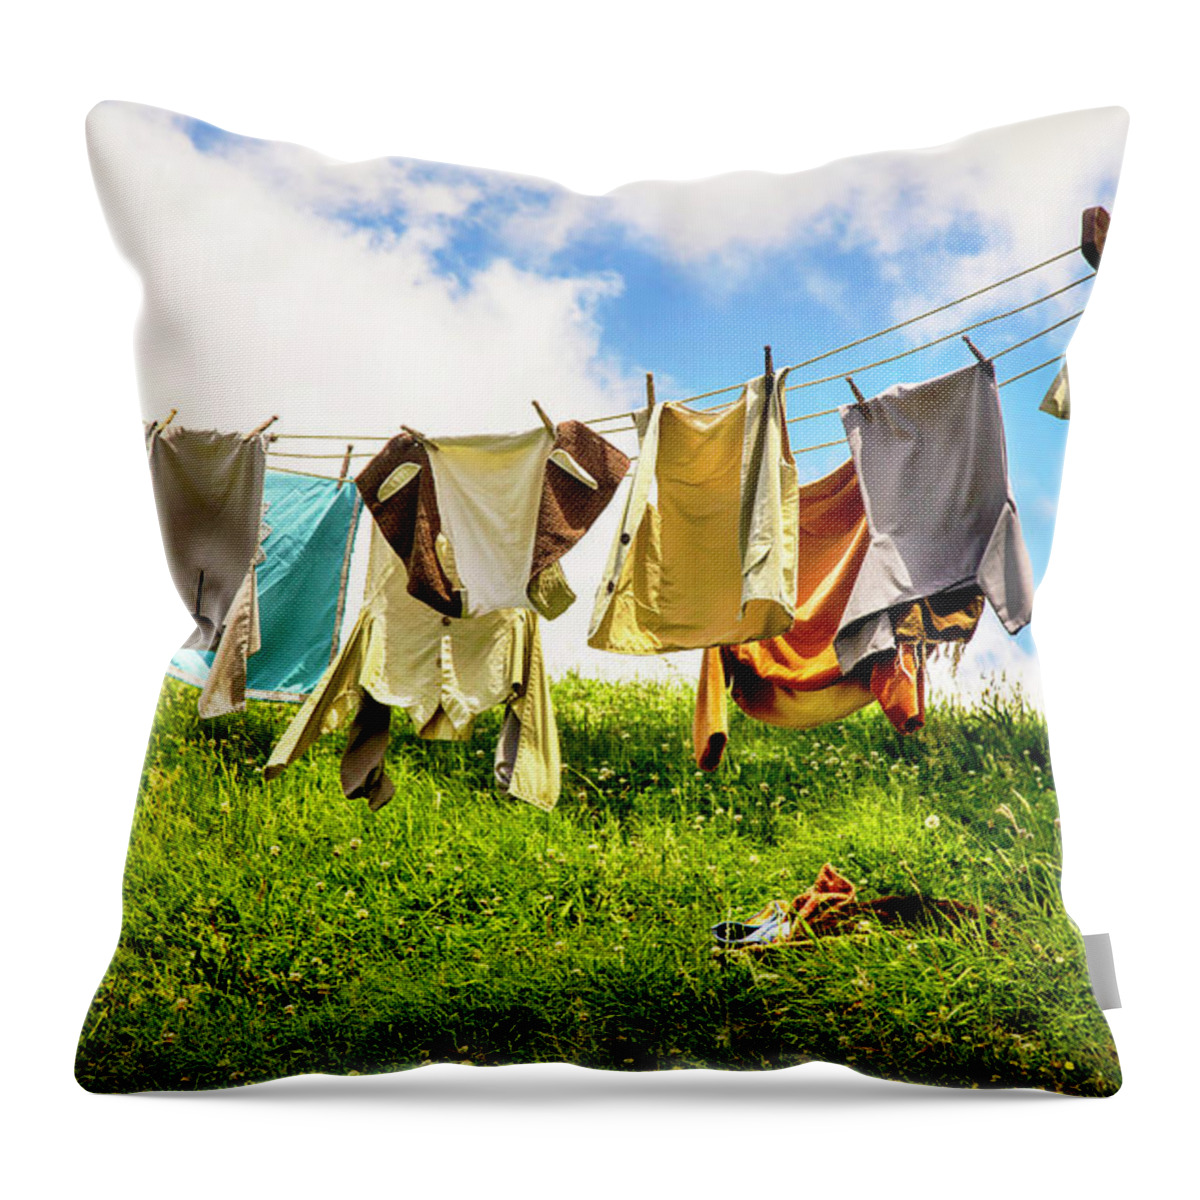 Hobbits Throw Pillow featuring the photograph Hobbit Clothesline by Kathryn McBride